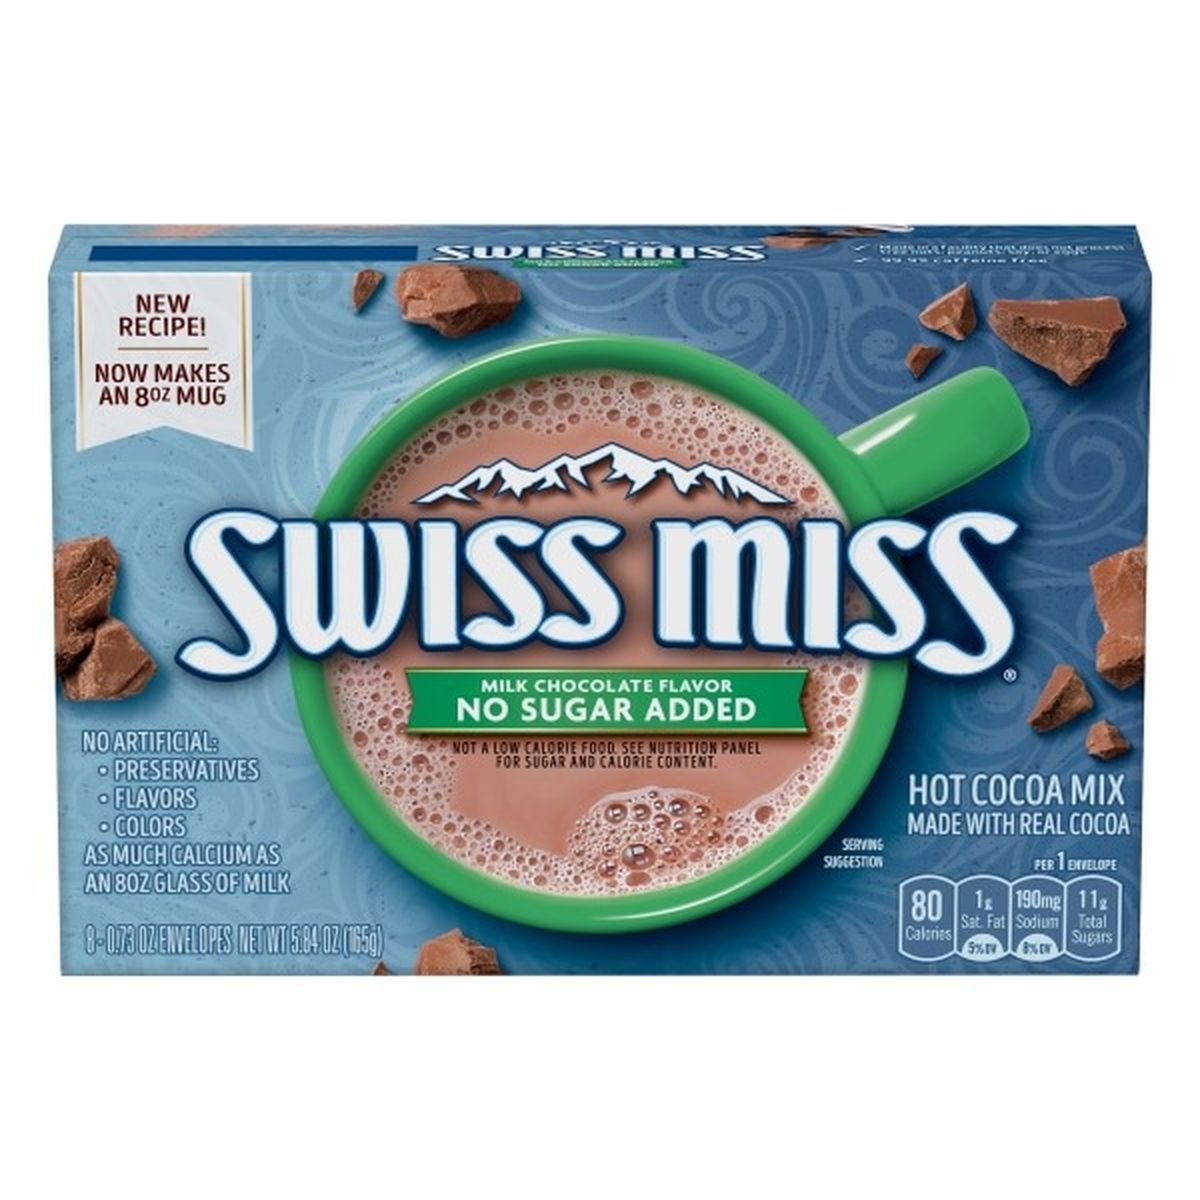 Calories in Swiss Miss Hot Cocoa Mix, No Sugar Added, Milk Chocolate Flavor